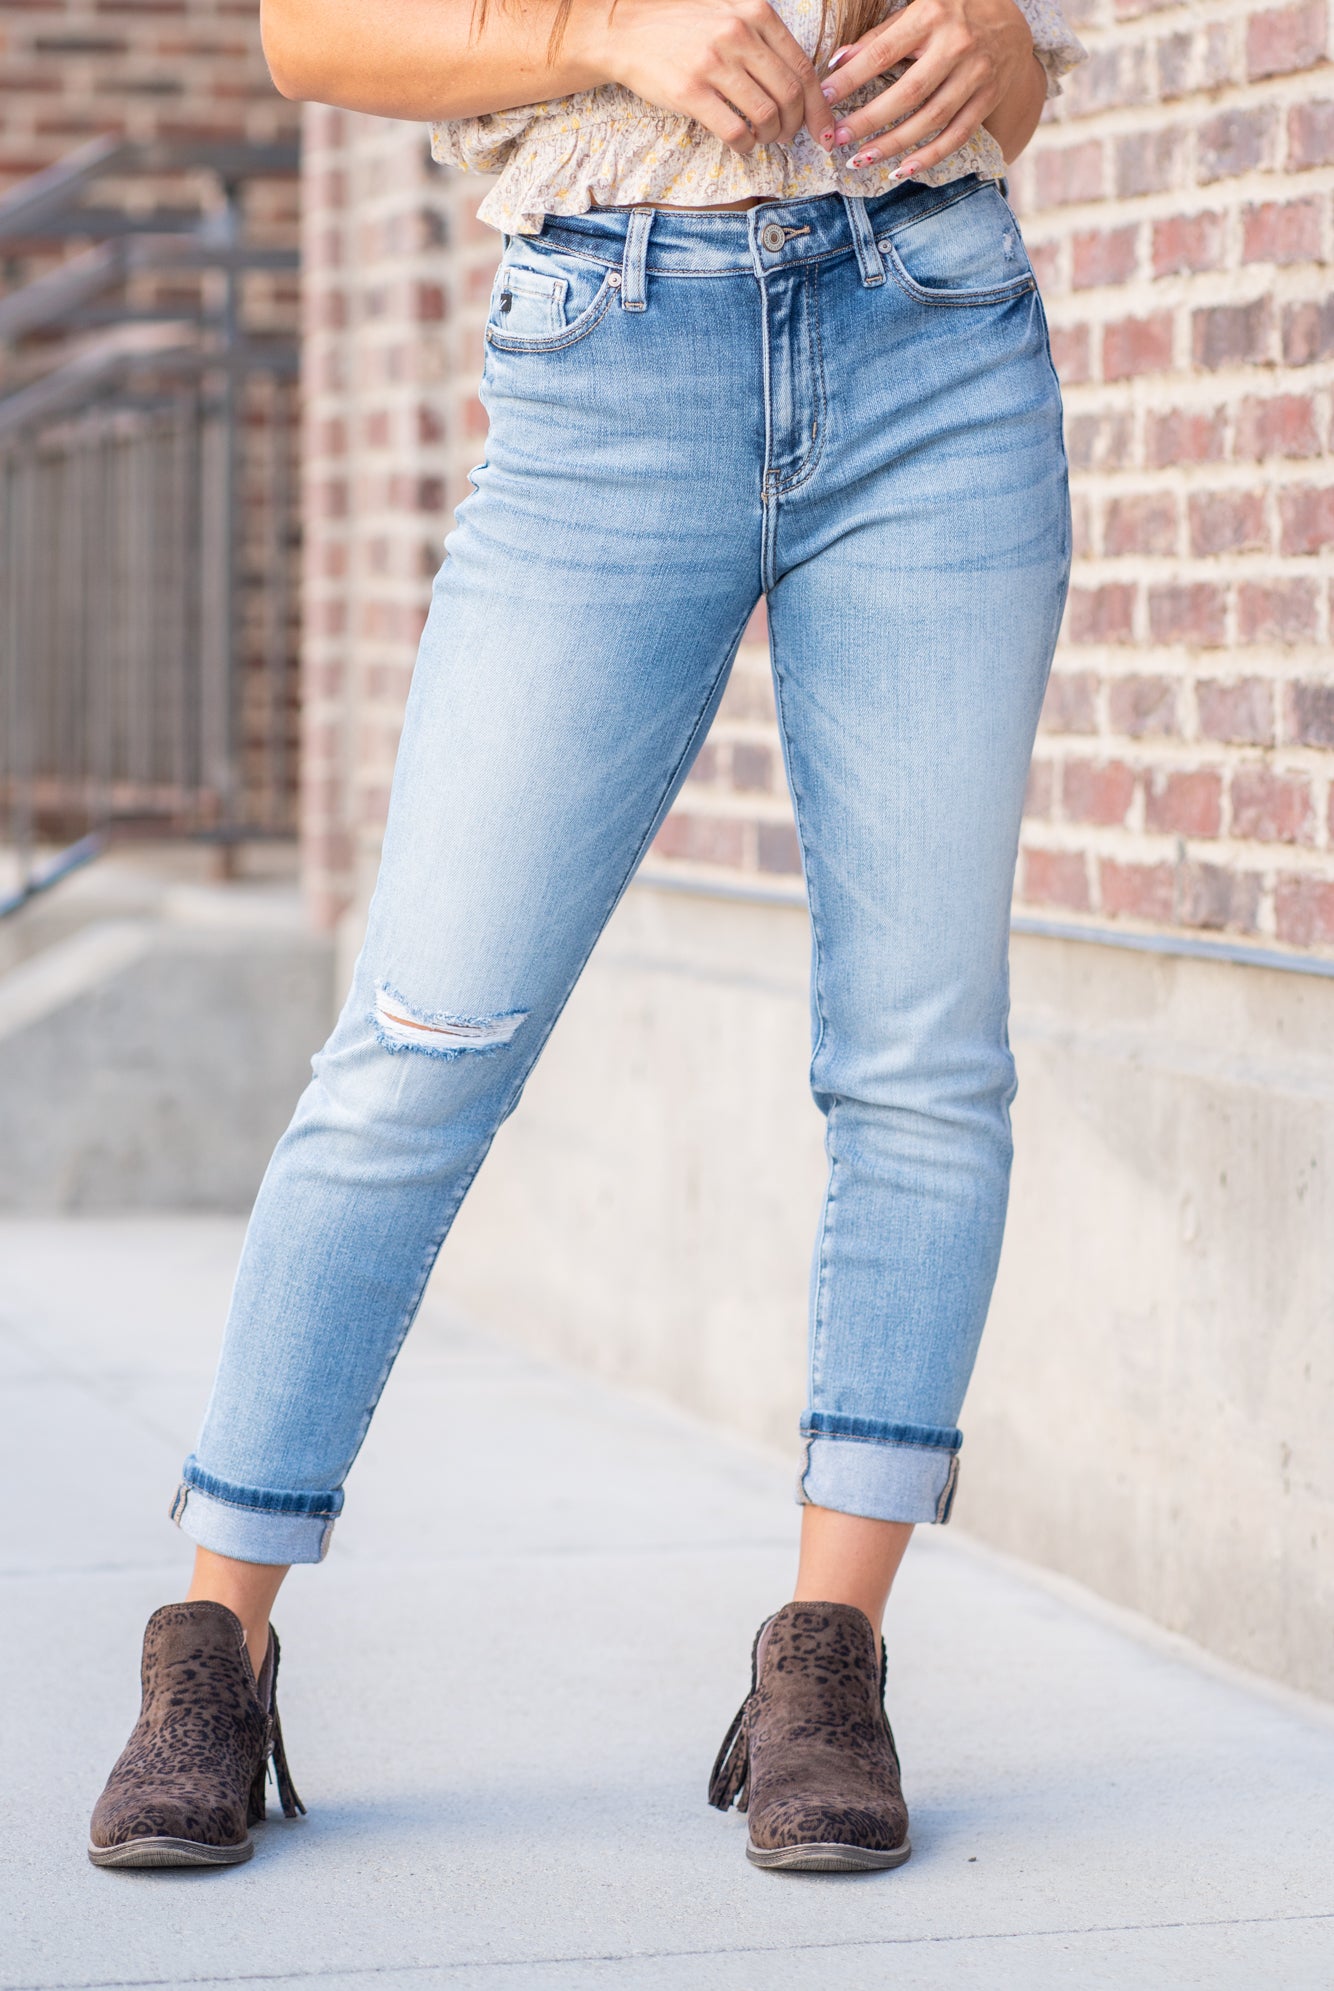 KanCan Jeans  These mom jeans will become your go-to! Pair these girlfriend mom fit with booties and a tee for an easy fall look.  Color: Medium Blue Wash Cut: Straight Fit, 26" Inseam Cuffed* Rise: High-Rise, 11" Front Rise* 94% COTTON , 5% POLYESTER , 1% SPANDEX Fly: Zipper Style #: KC9232M Contact us for any additional measurements or sizing.